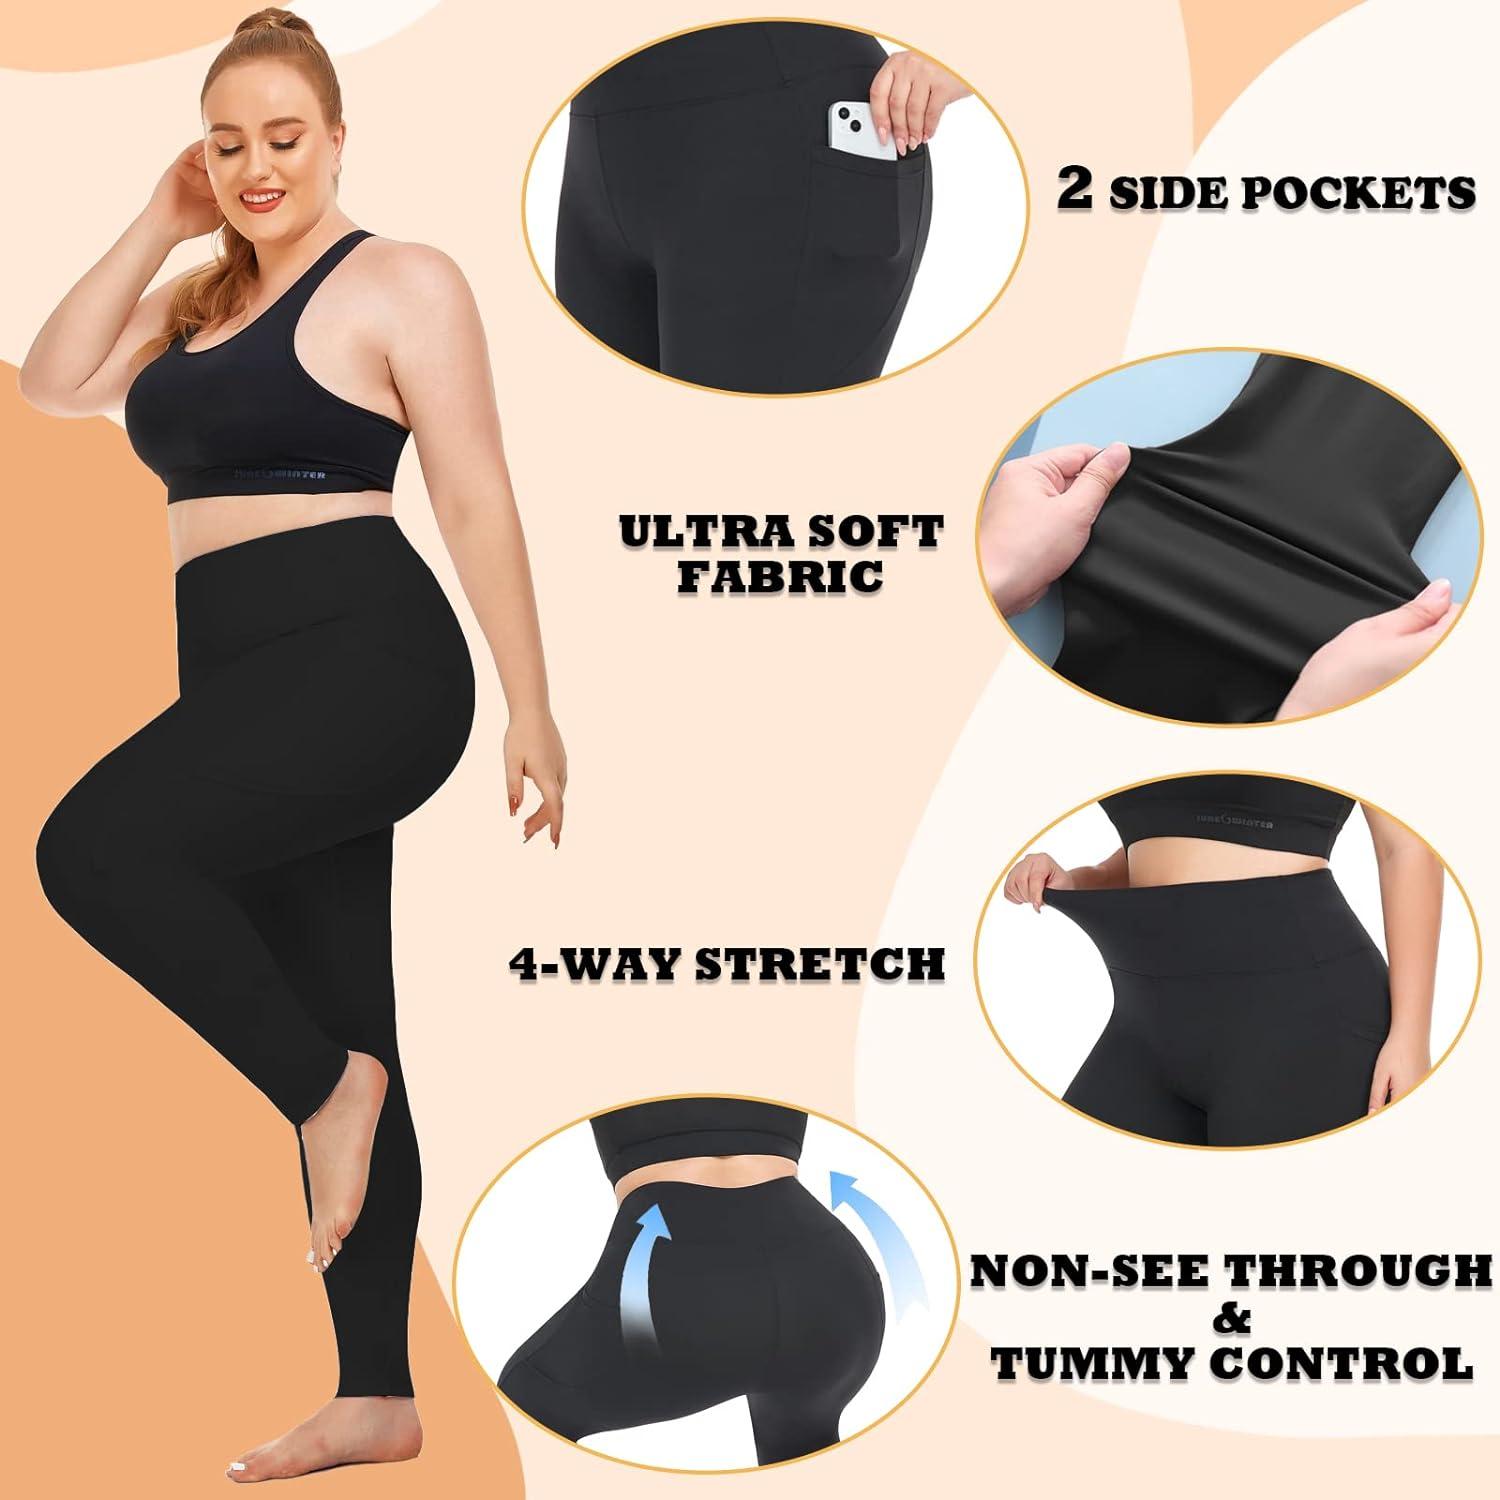 2-Pack Yoga Pants for Women Leggings with Side Pockets Workout